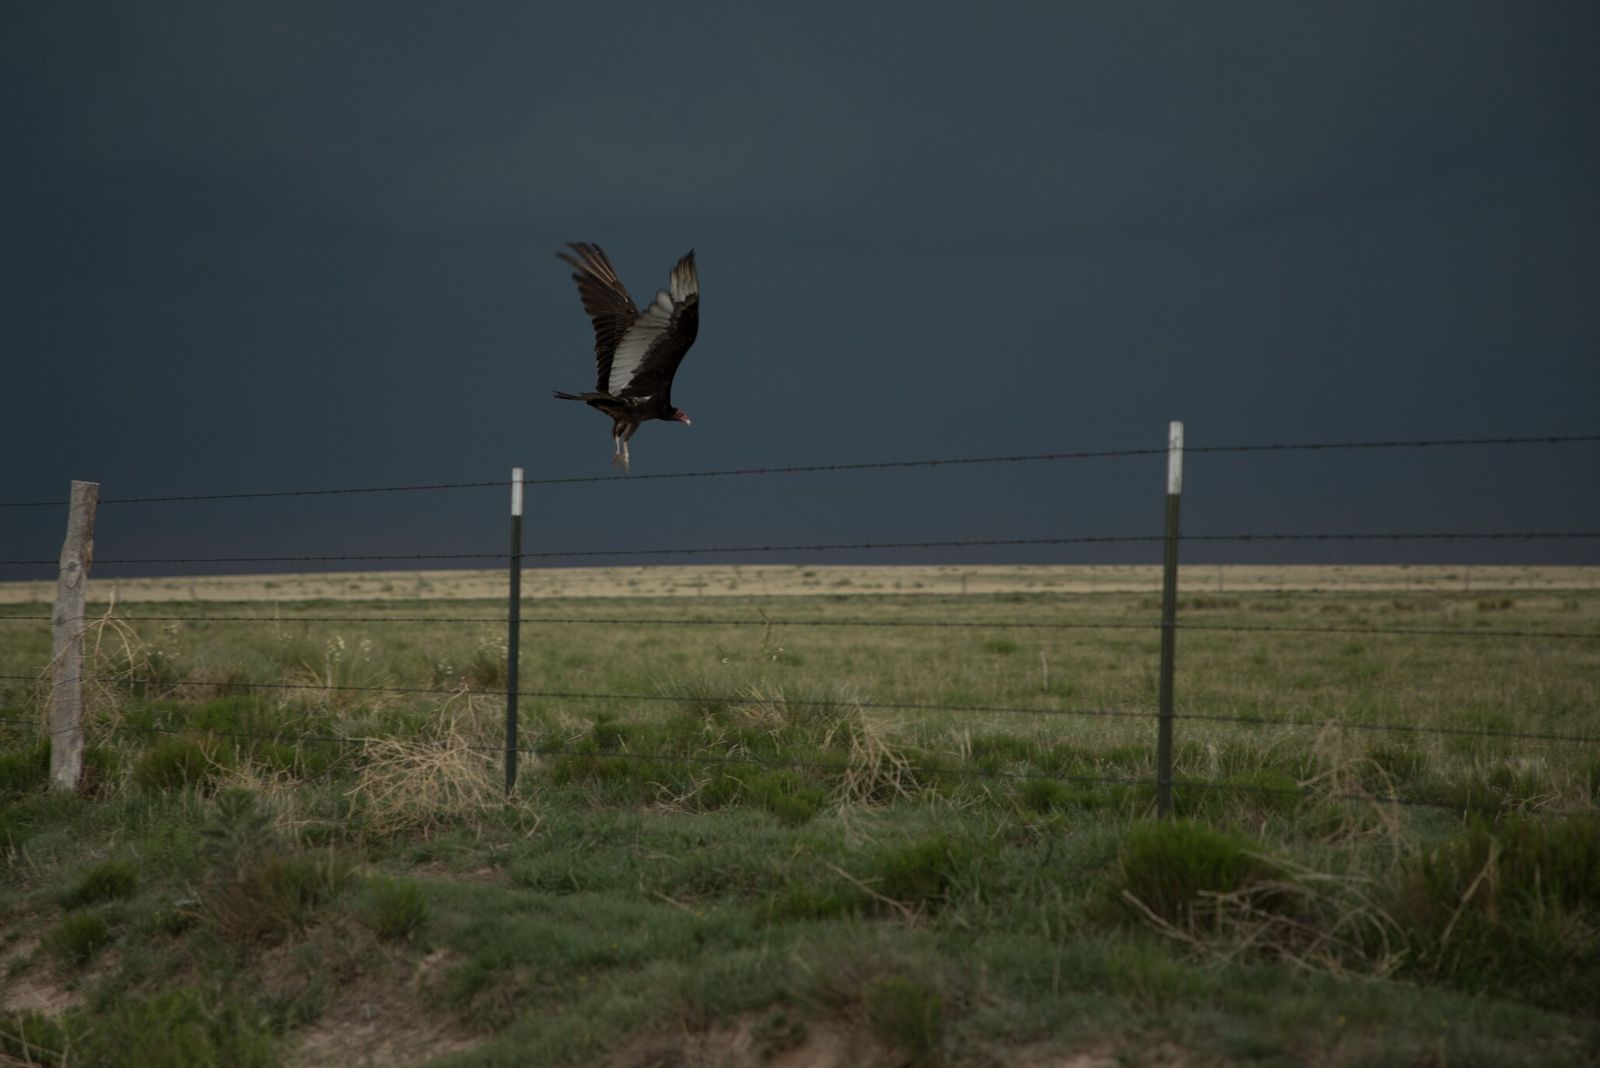 Lasers, Cannons, and Scarecrows: The surprisingly scientific approach to fending off vultures